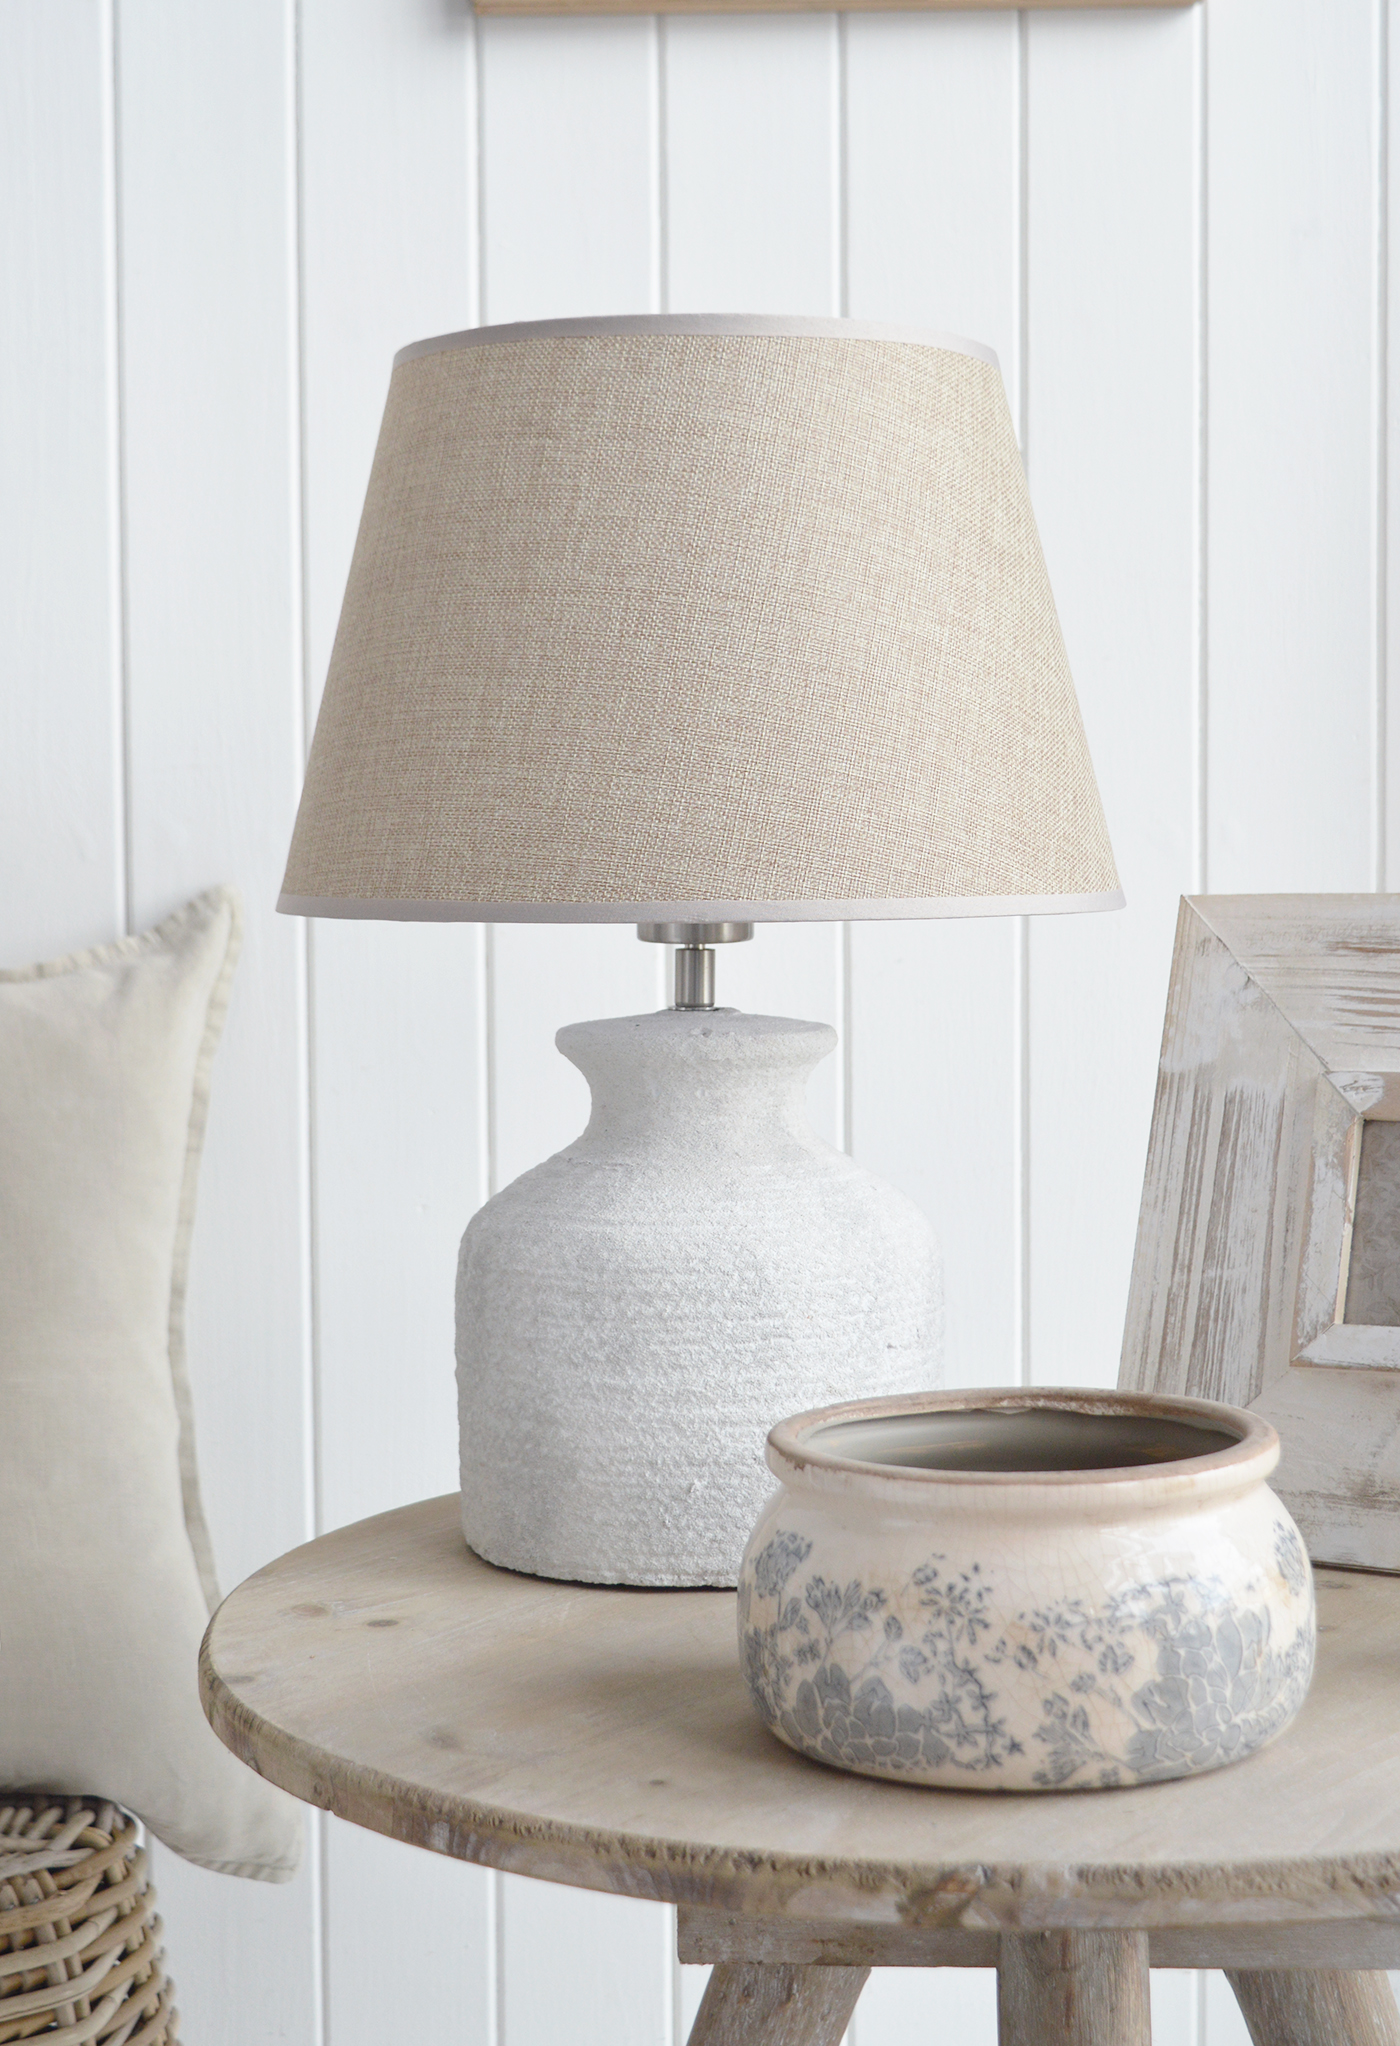 Barnstead grey  stone lamp from The White Lighthouse Furniture. A lovely table lamp for bedside table or living room or bedroom furniture. New England style table lamps for country, coastal, city and farmhouse styled homes